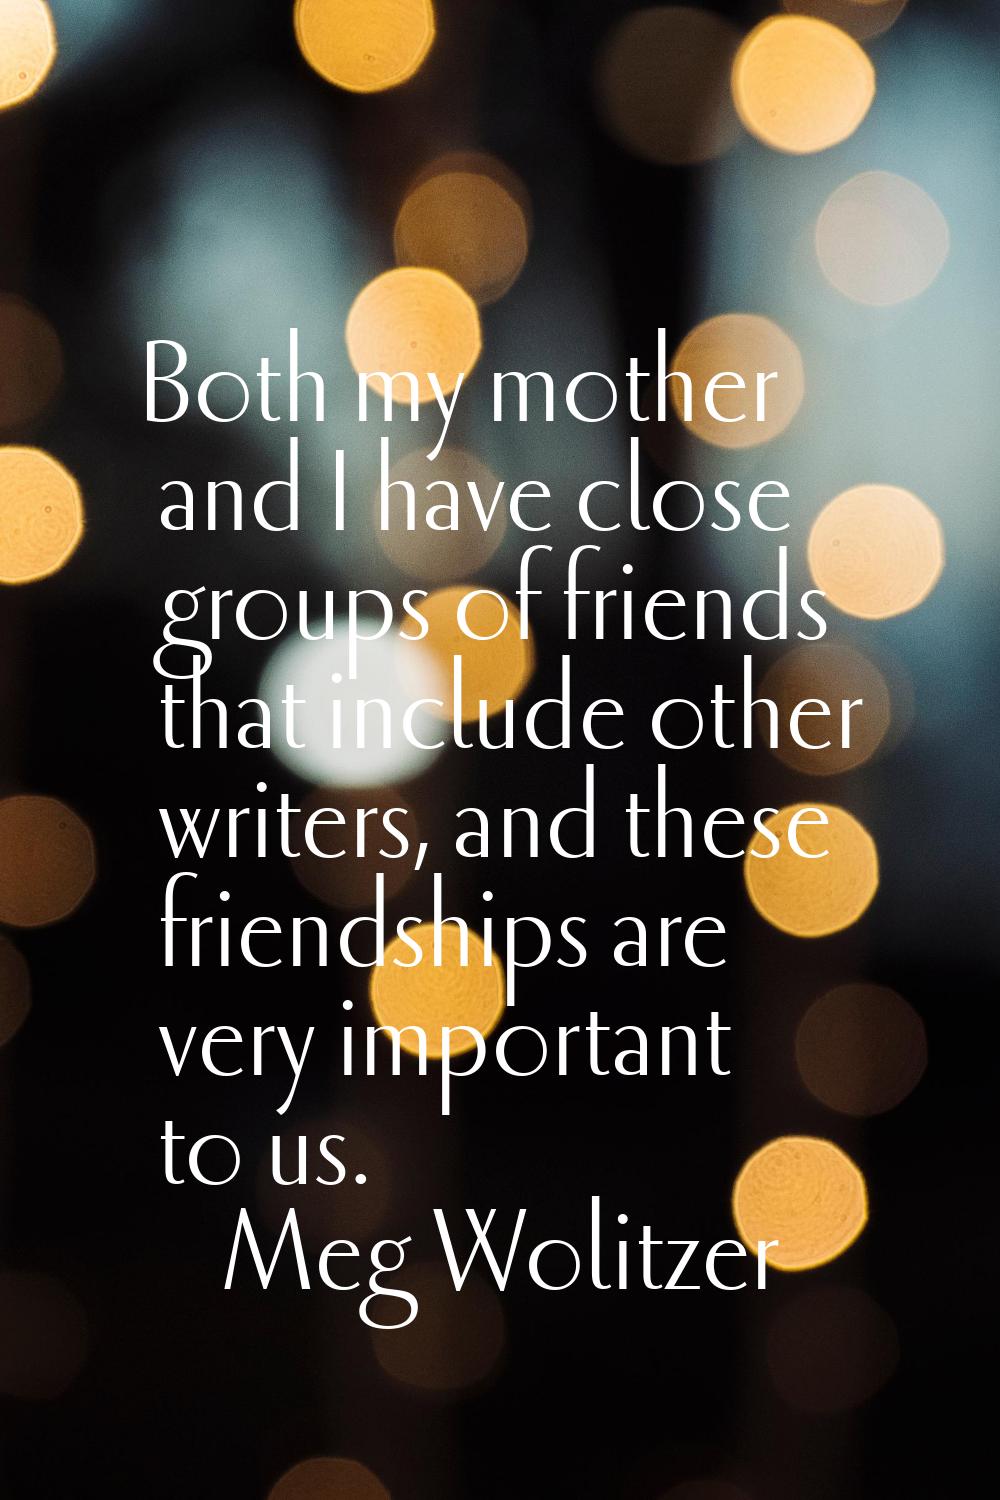 Both my mother and I have close groups of friends that include other writers, and these friendships